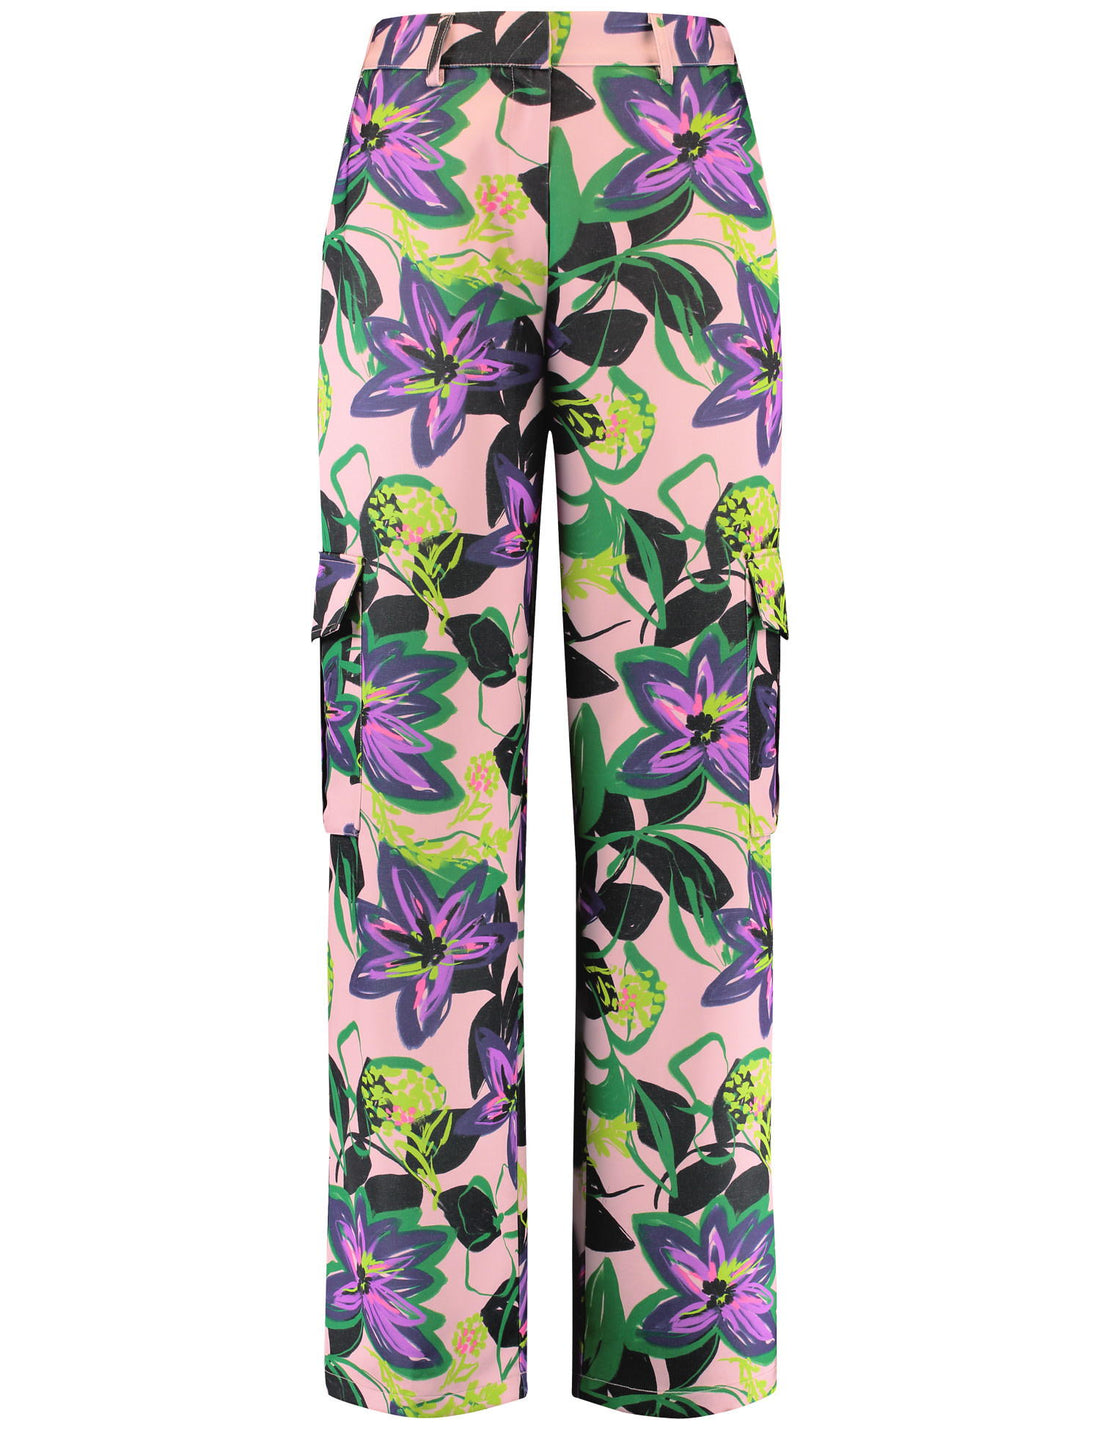 Cargo Trousers With A Floral Pattern_320015-31243_3058_02